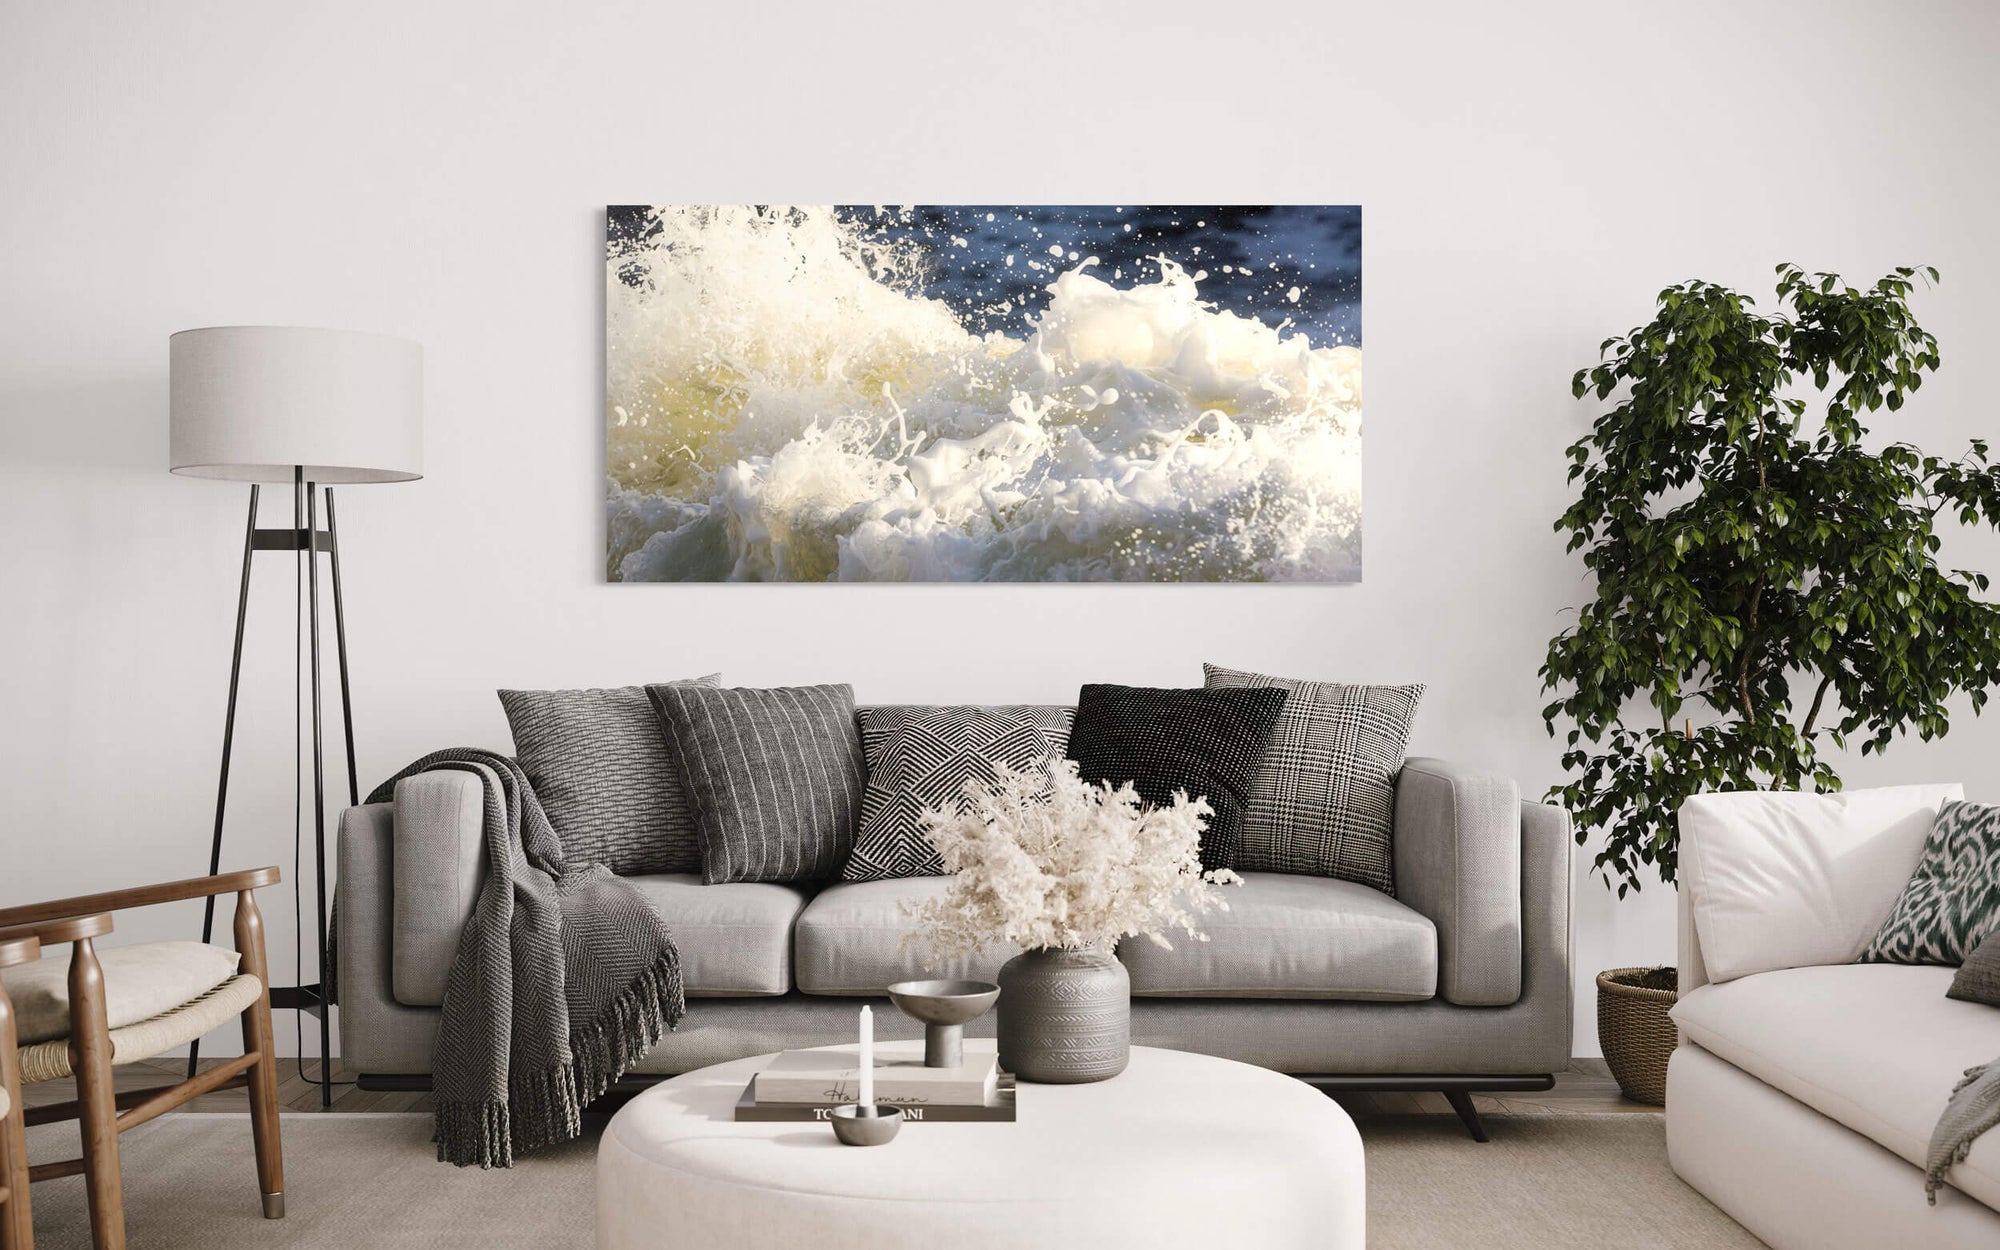 A Shark Fin Cove picture of waves near Big Sur, California hangs in a living room.